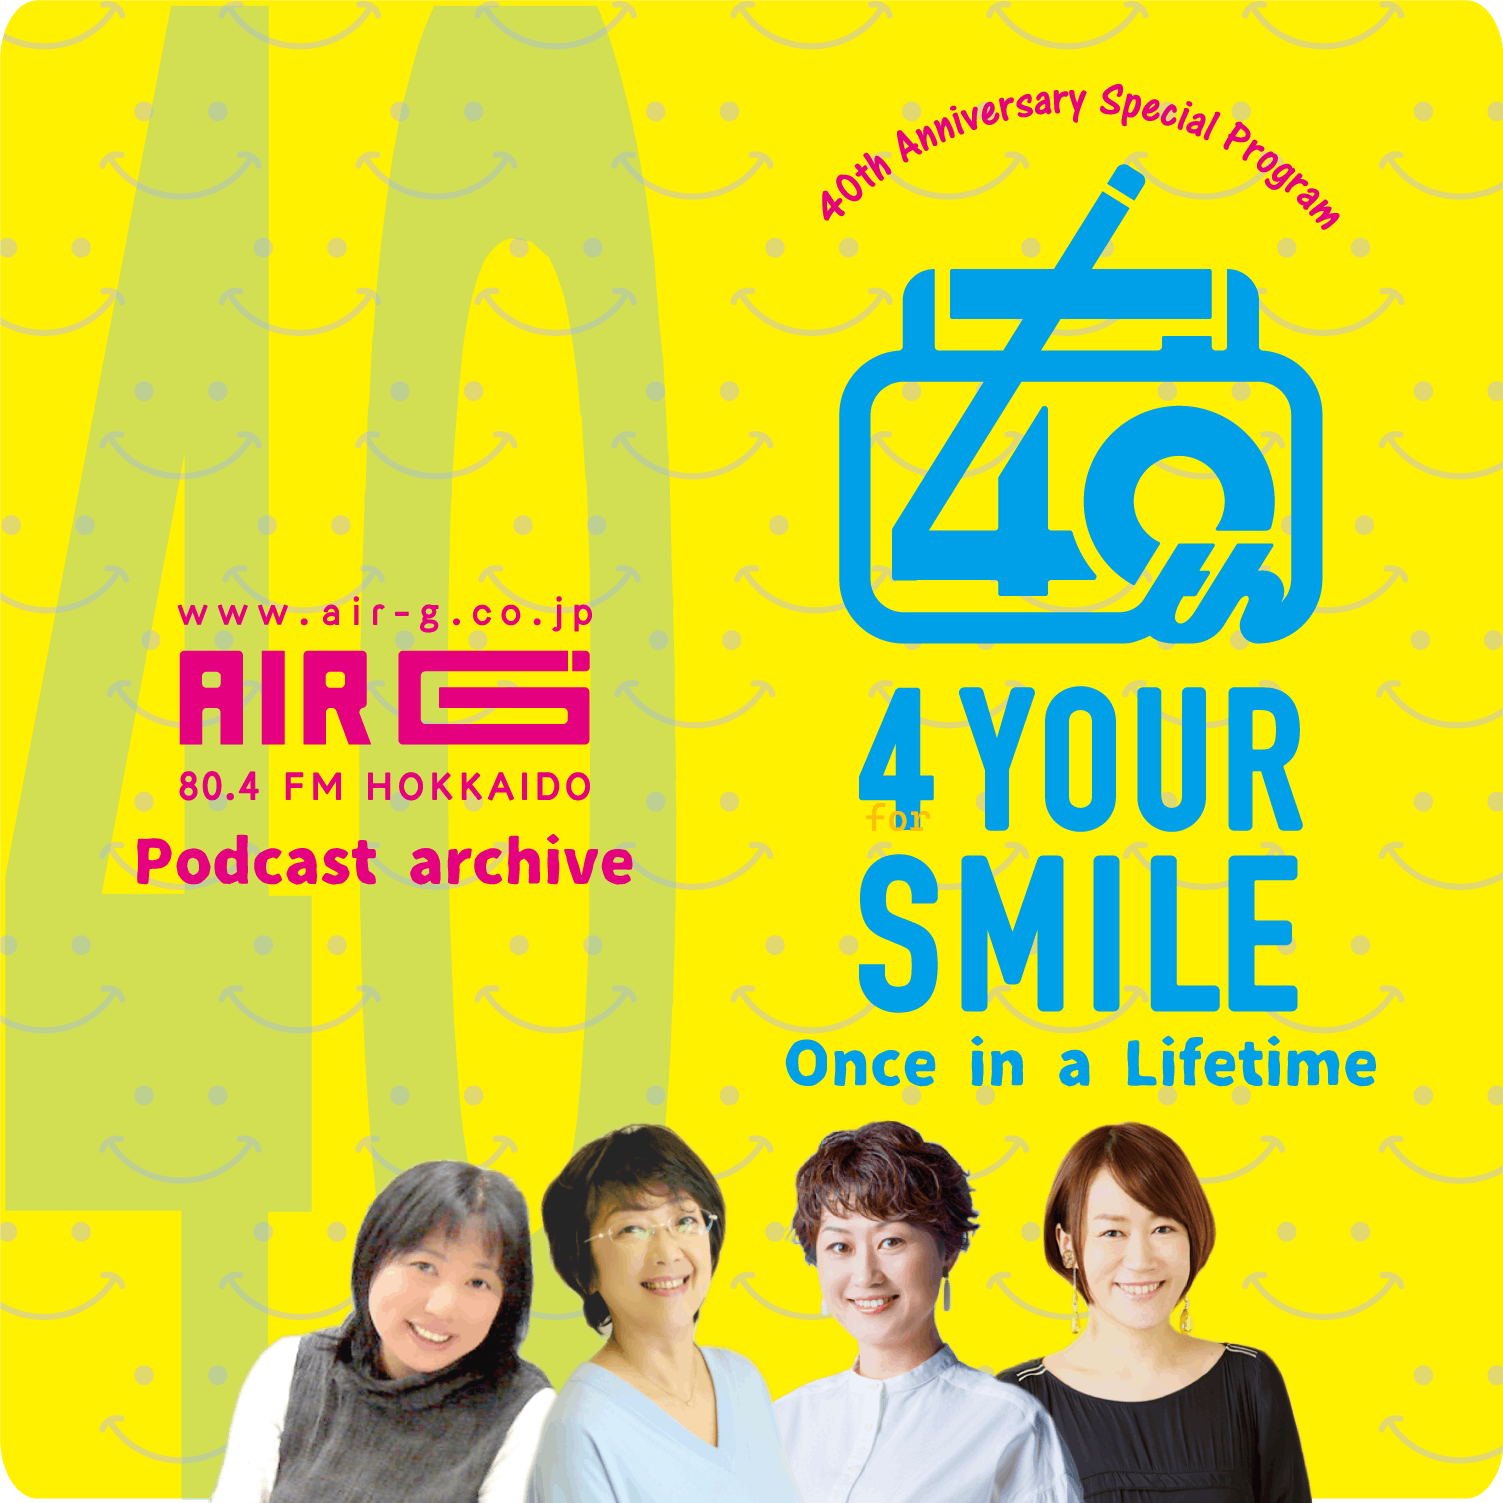 4 your SMILE Archive 【AIR-G'開局40年特別プログラム】